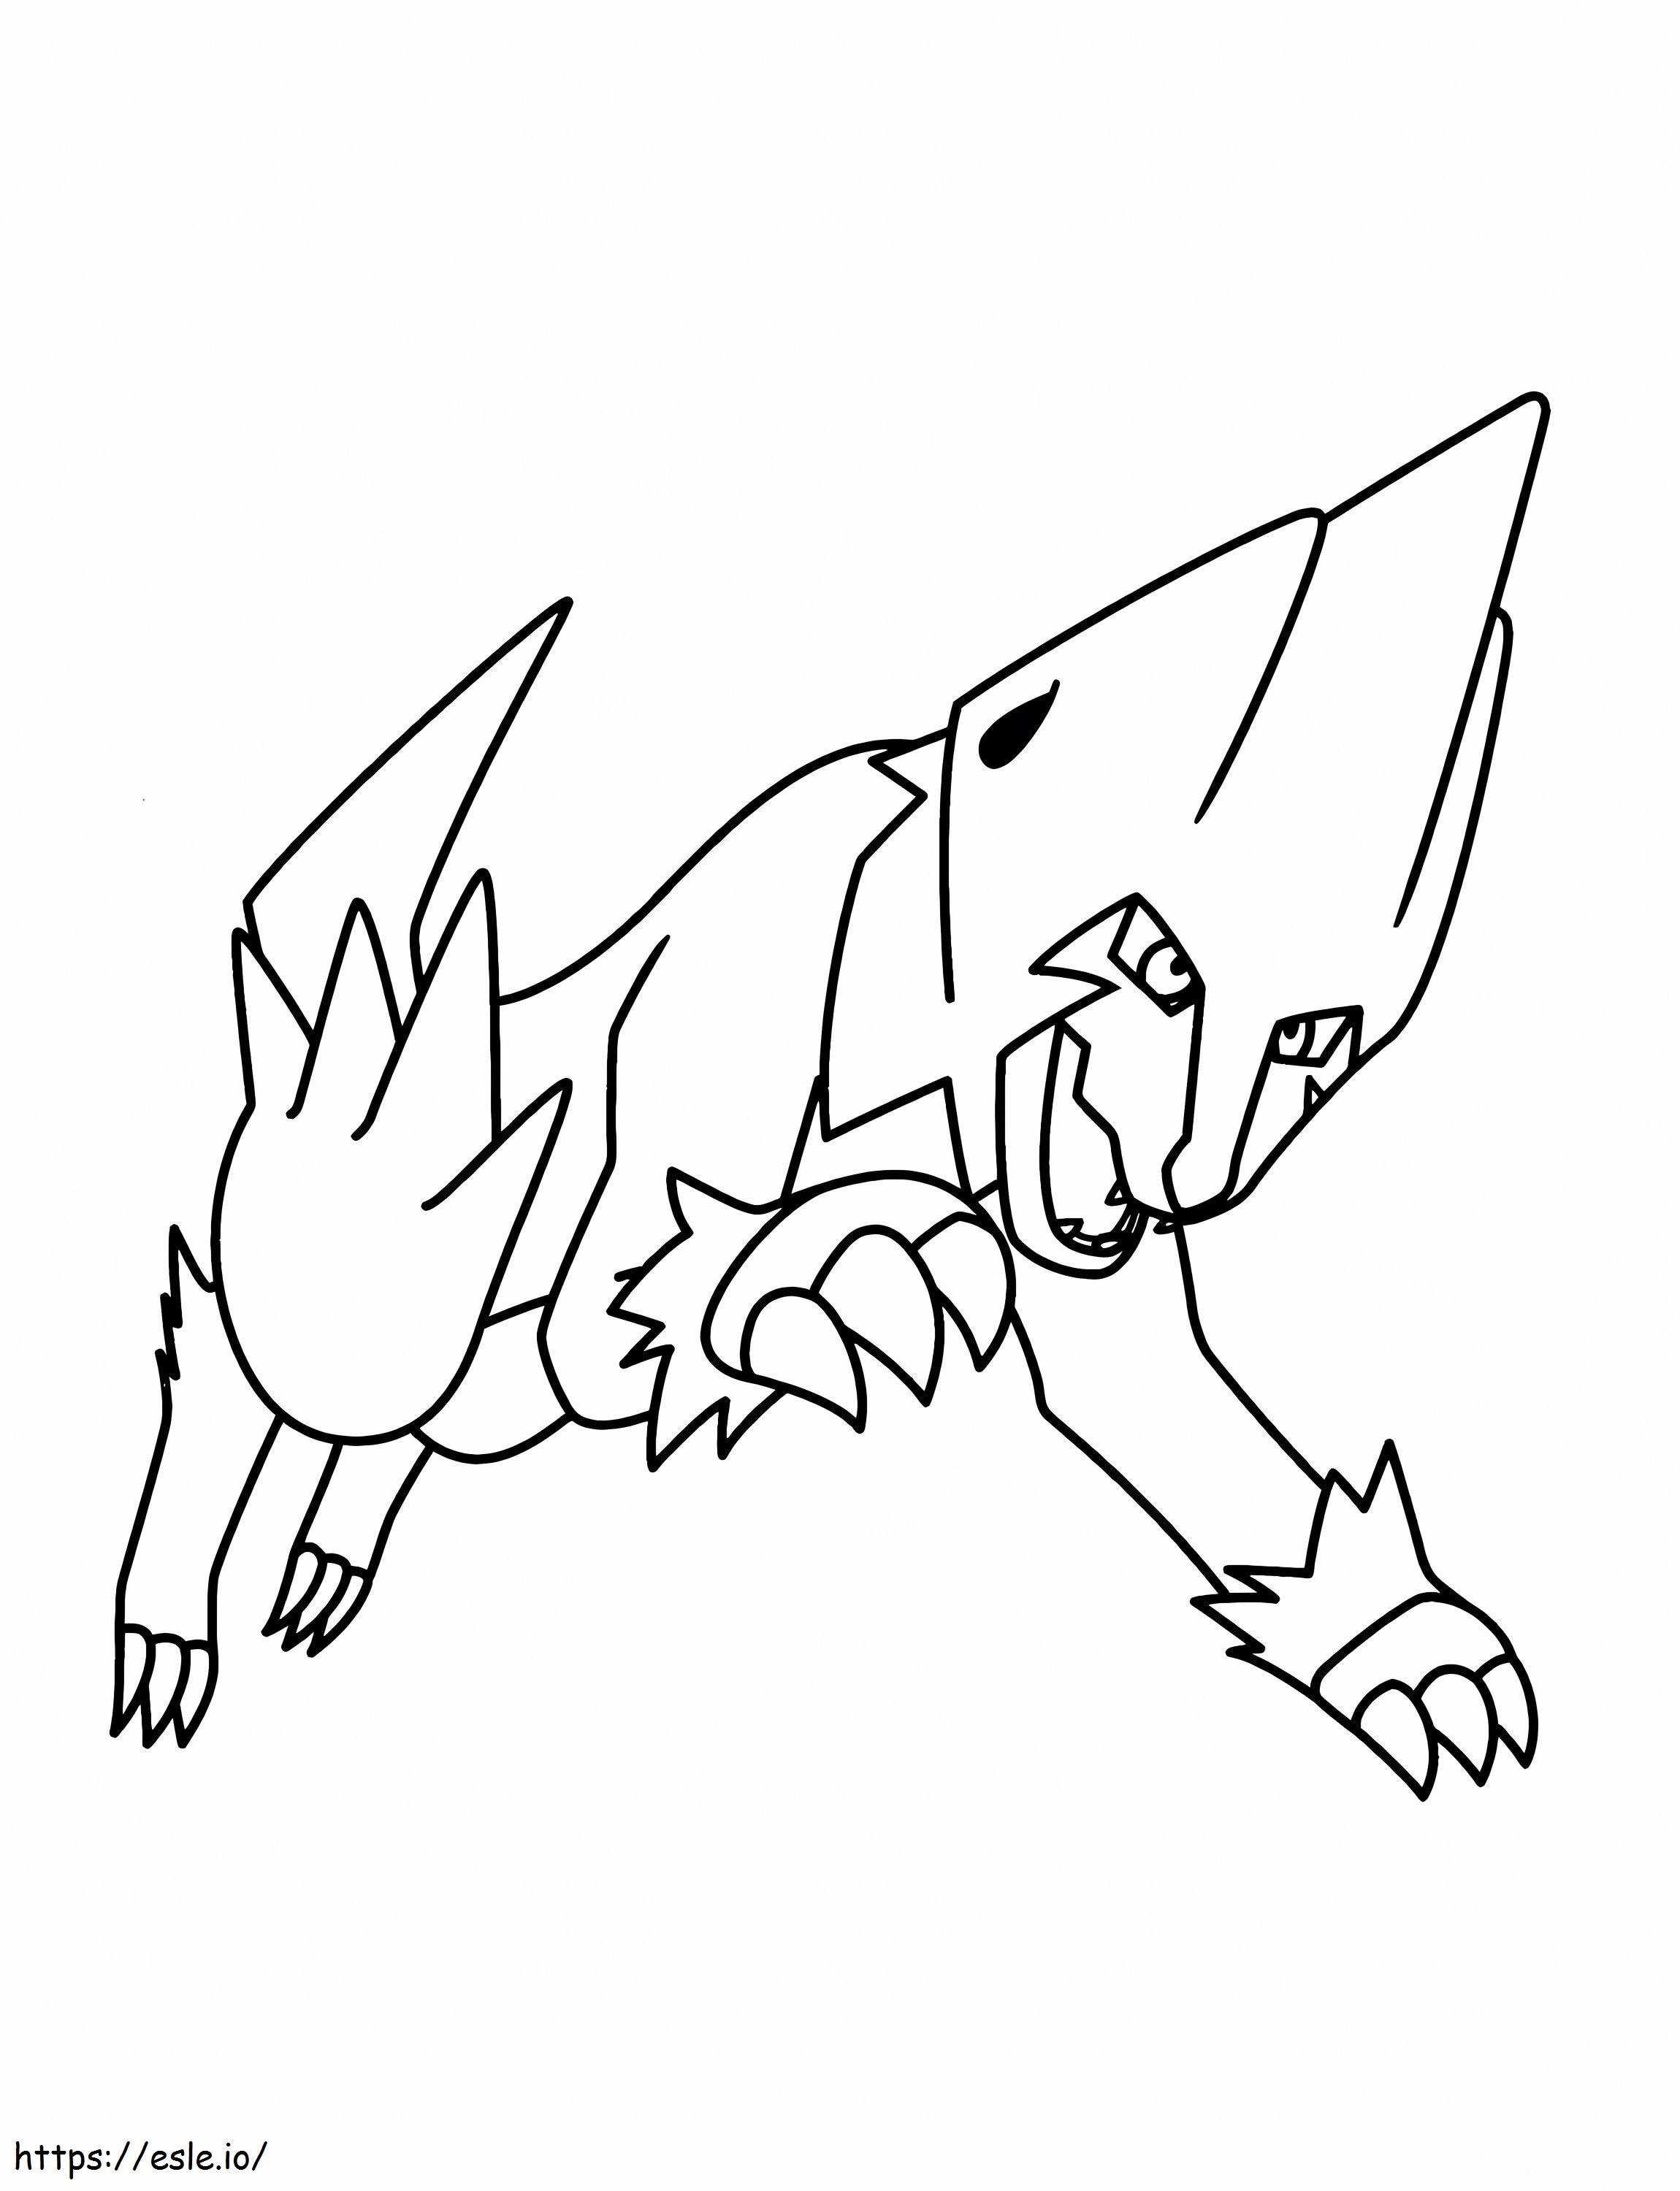 Manectric coloring page